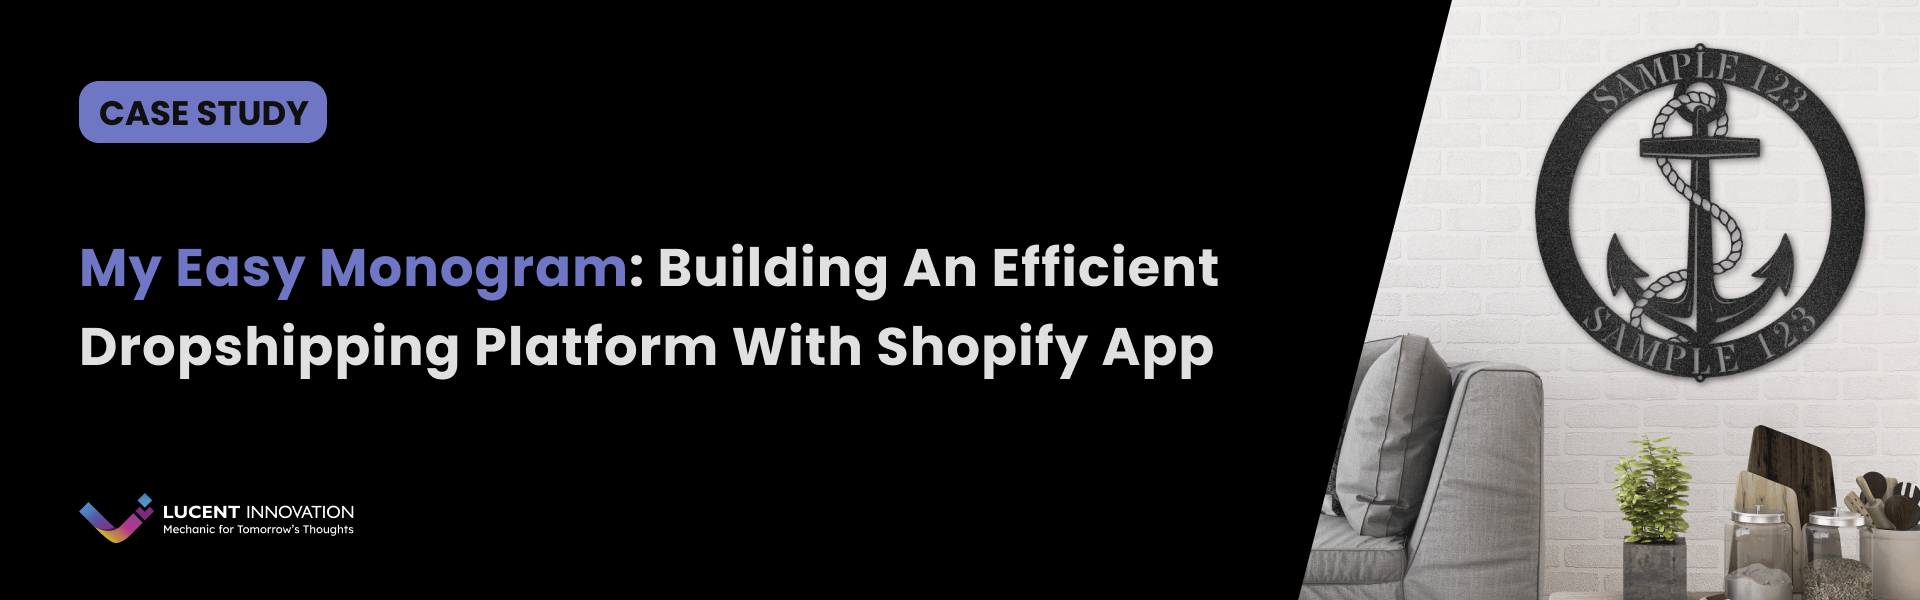 My Easy Monogram: Building an Efficient Dropshipping Platform with Shopify App